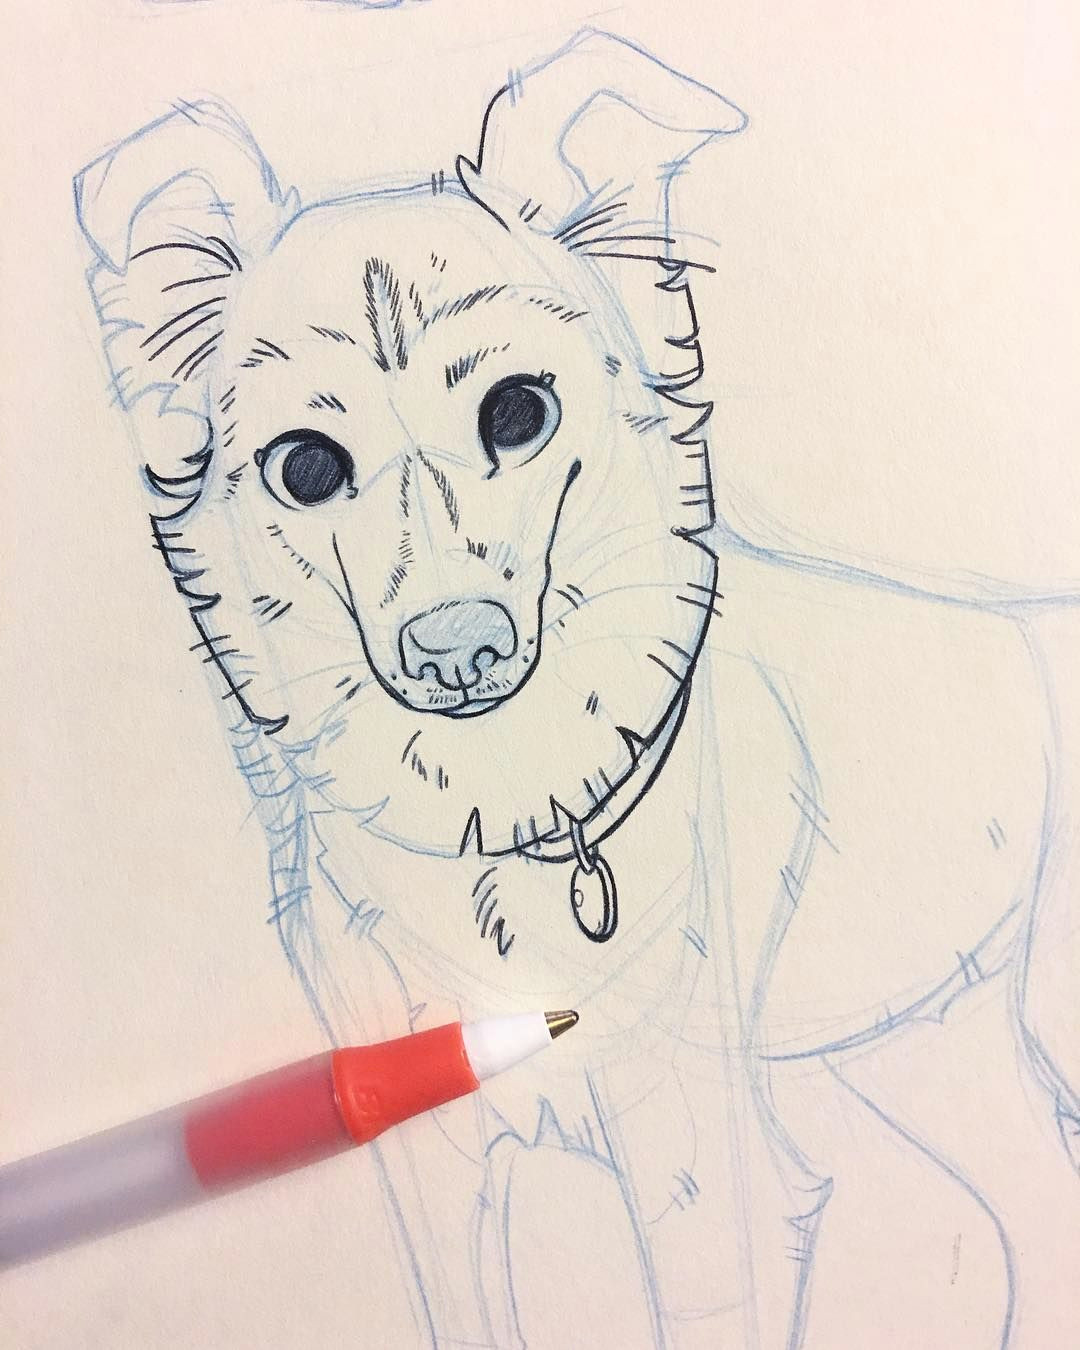 Drawing Comic Dogs Making Up A New Pet Portrait for Salt Lake City Comic Con This One